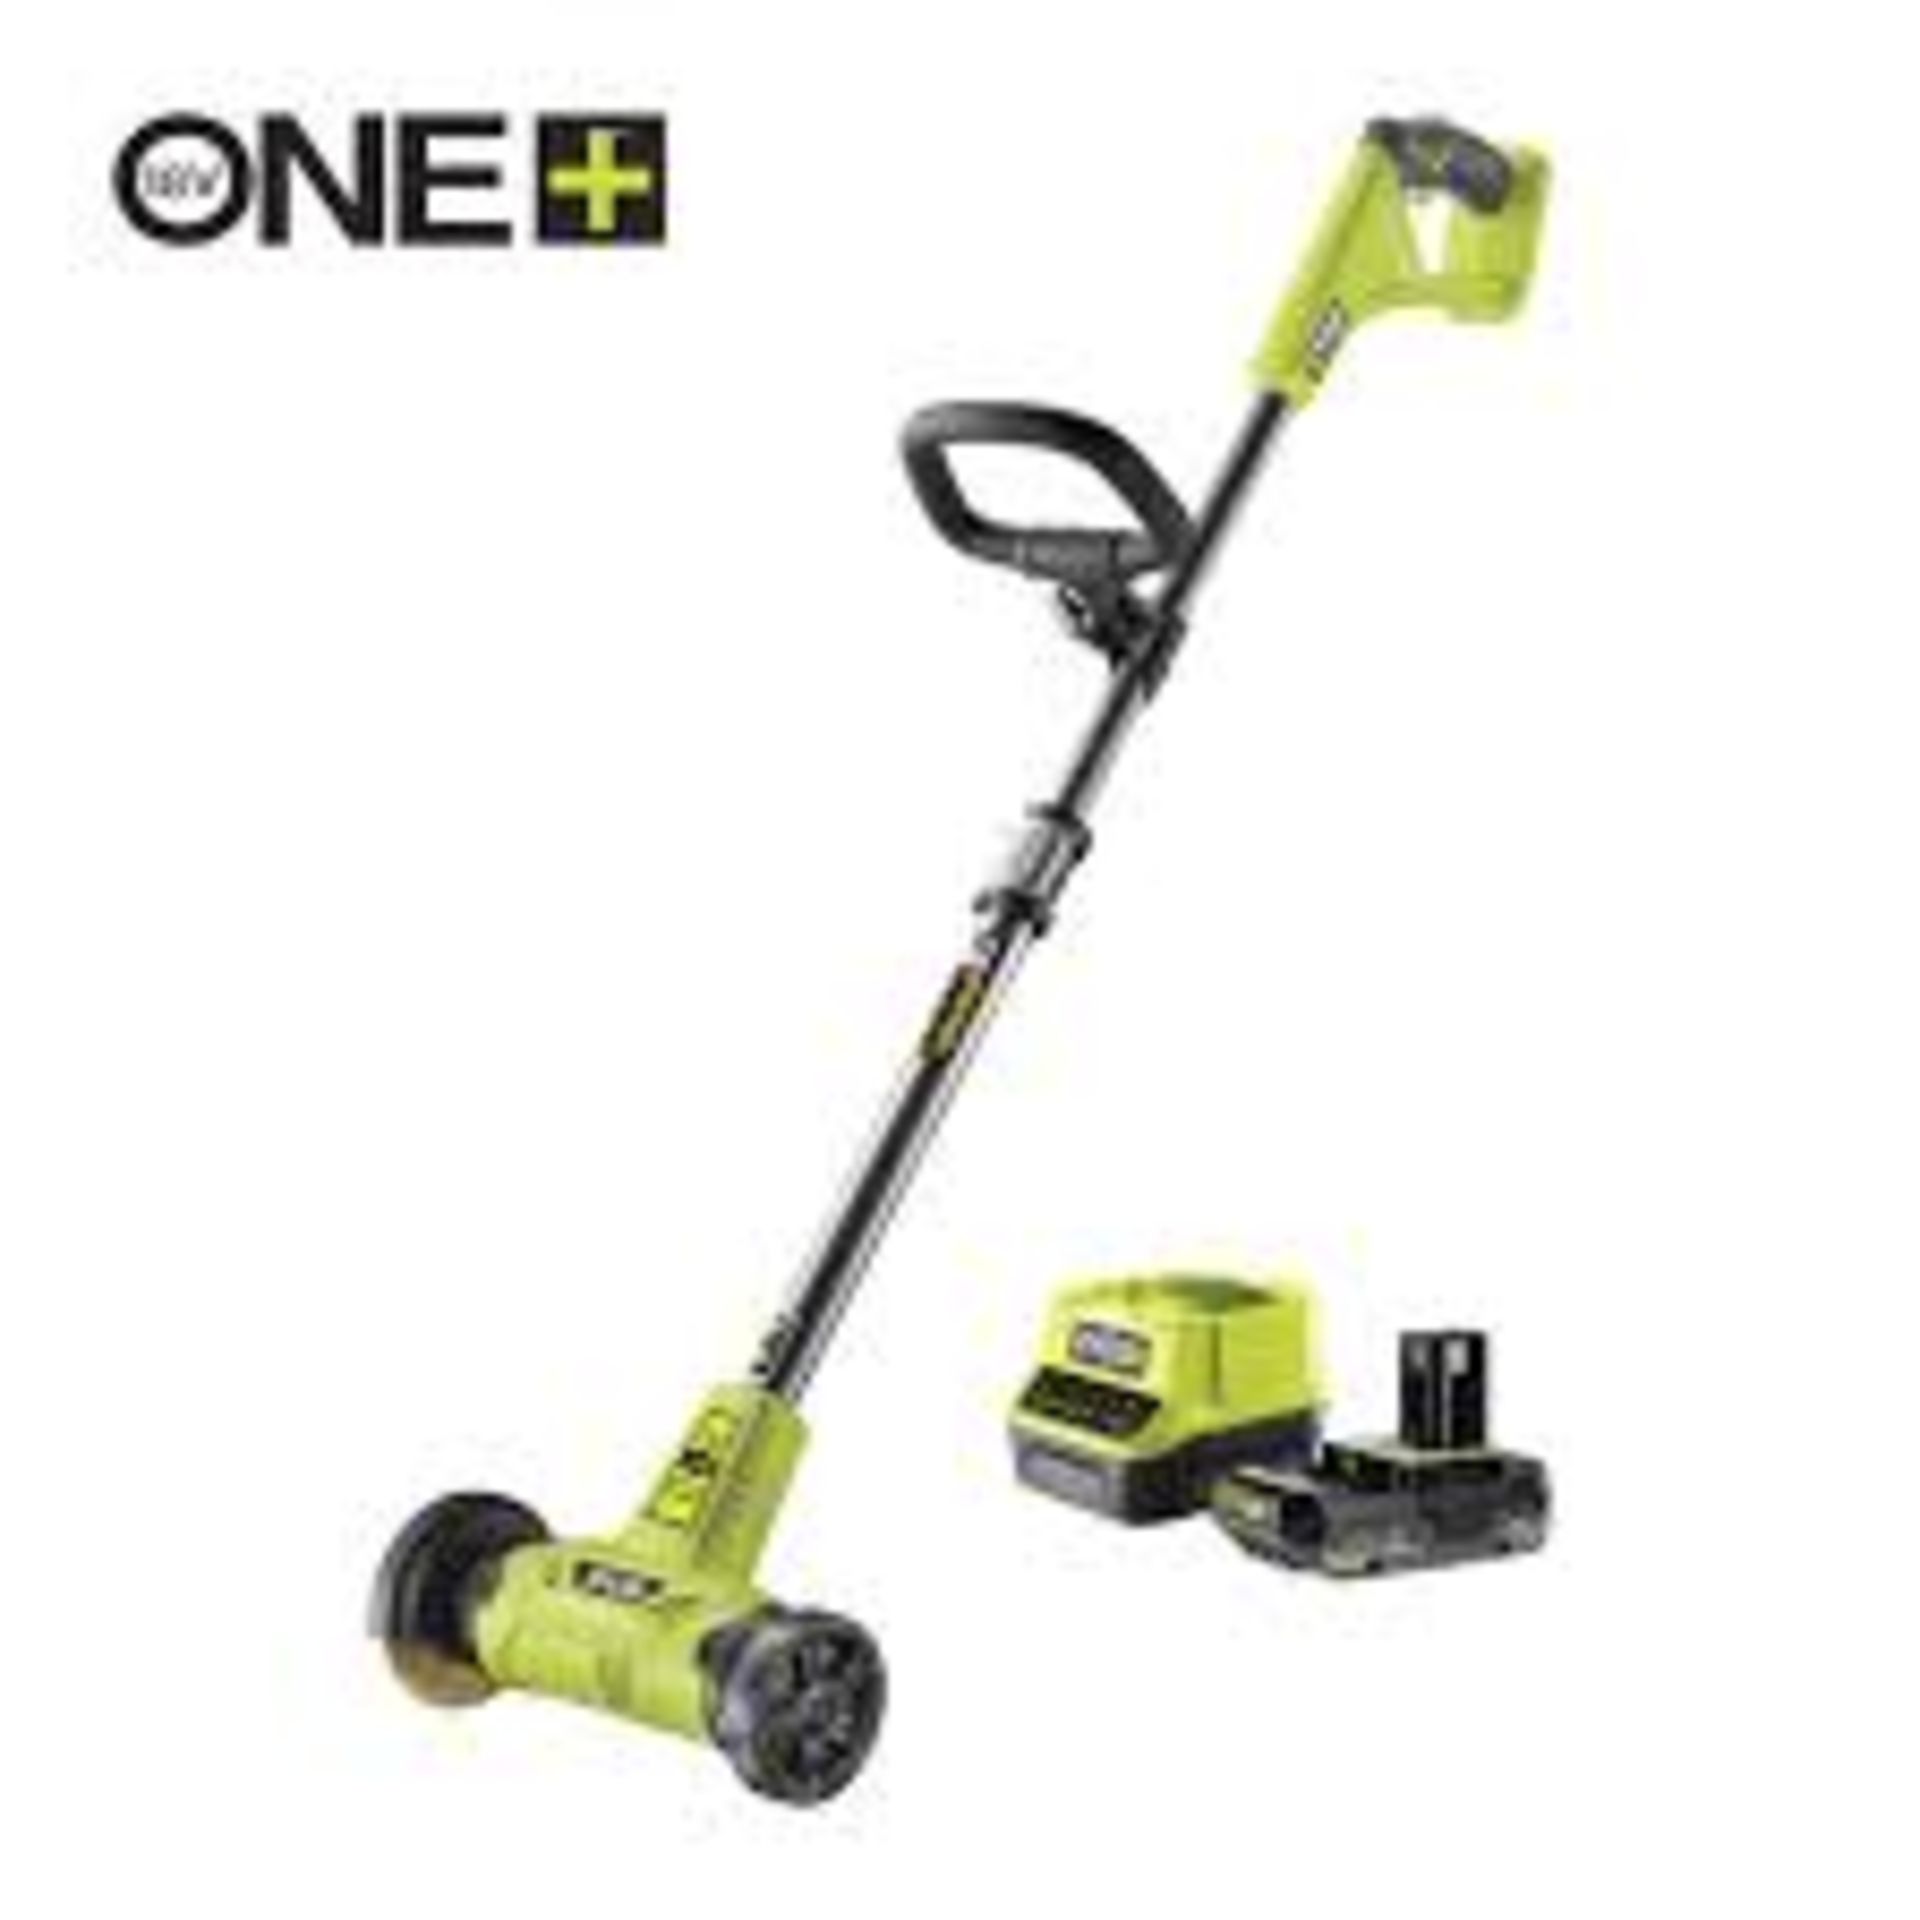 Ryobi 18V ONE+™ Cordless Patio Cleaner with Wire Brush. - S2.1.